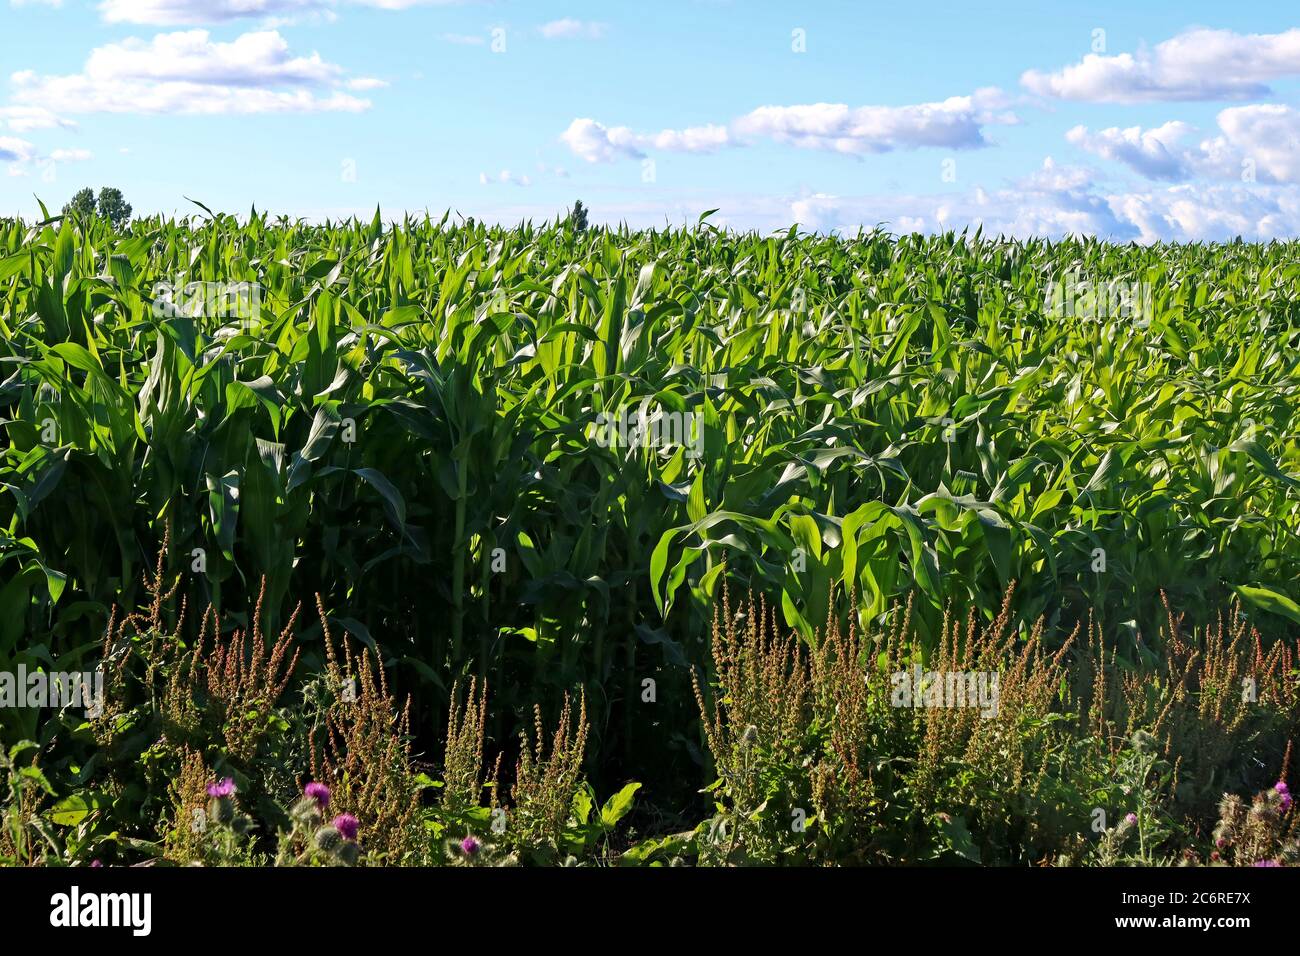 Maize field, Corn growing in Cheshire, Summer, England, UK,hot sun,agriculture Stock Photo